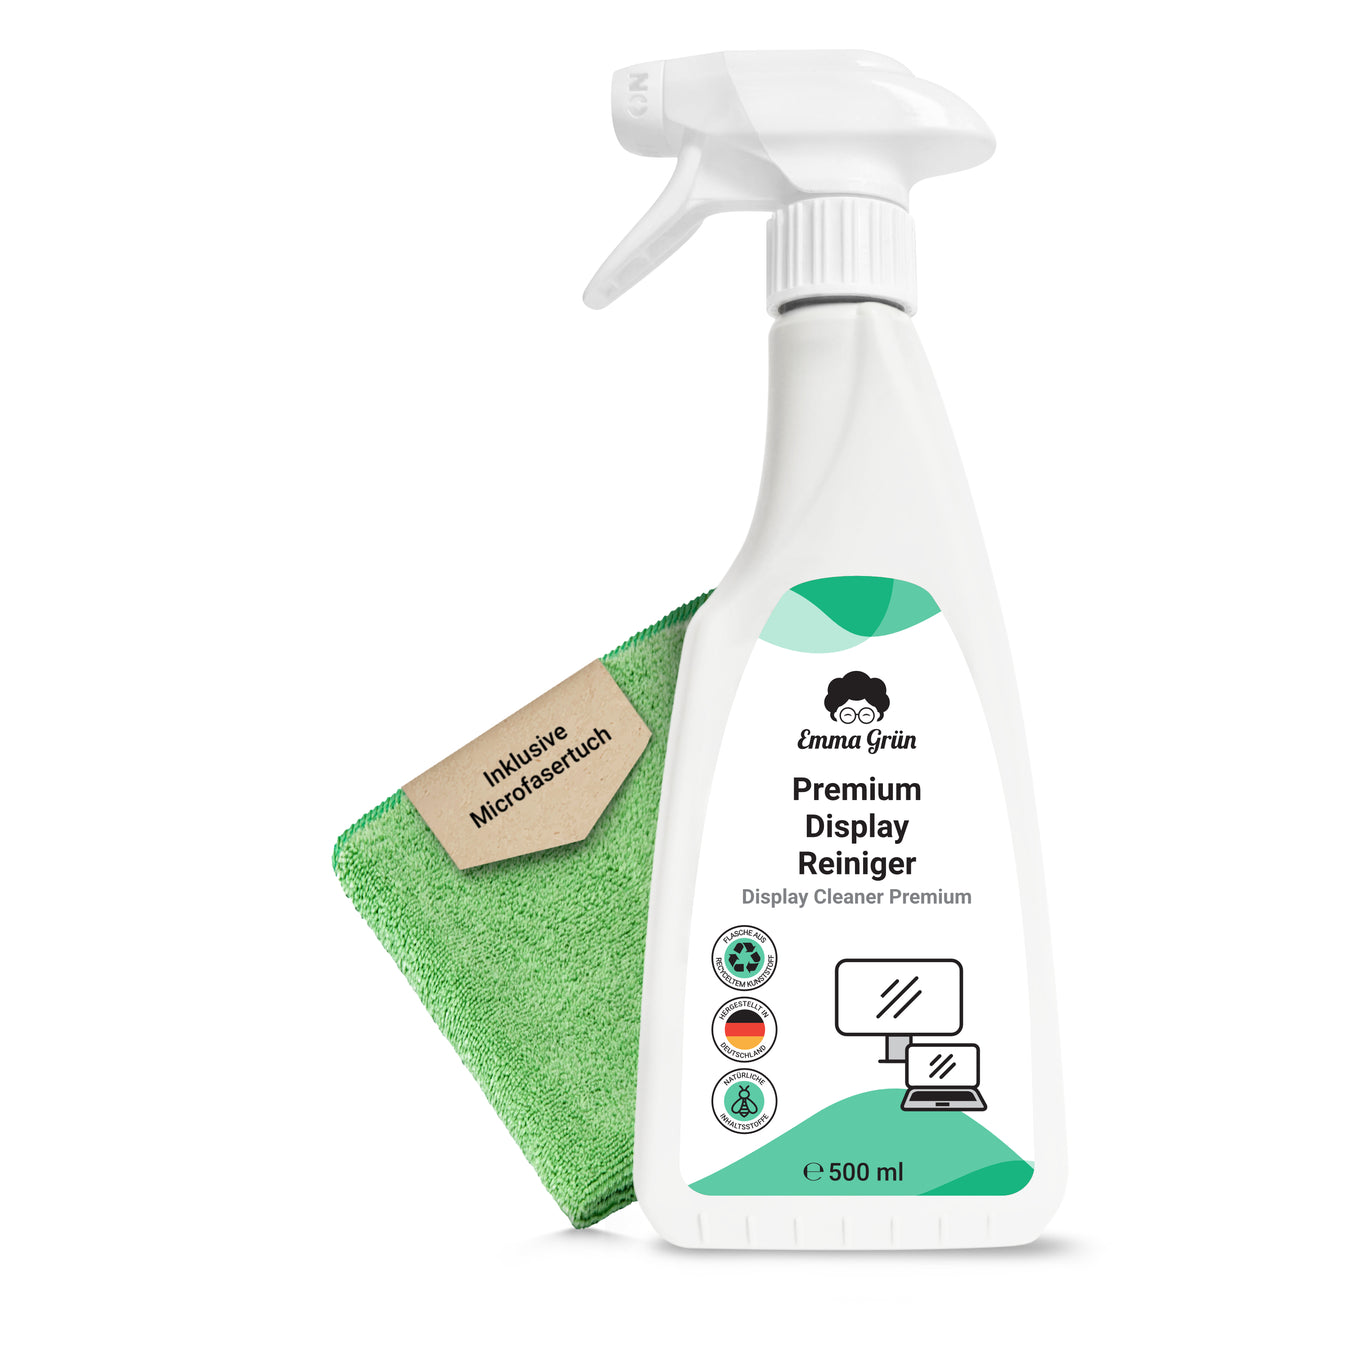 Flawless Screen Cleaner Spray with Microfiber Cleaning Cloth for LCD, LED  Displays on Computer, TV, iPad, Tablet, Phone, and More